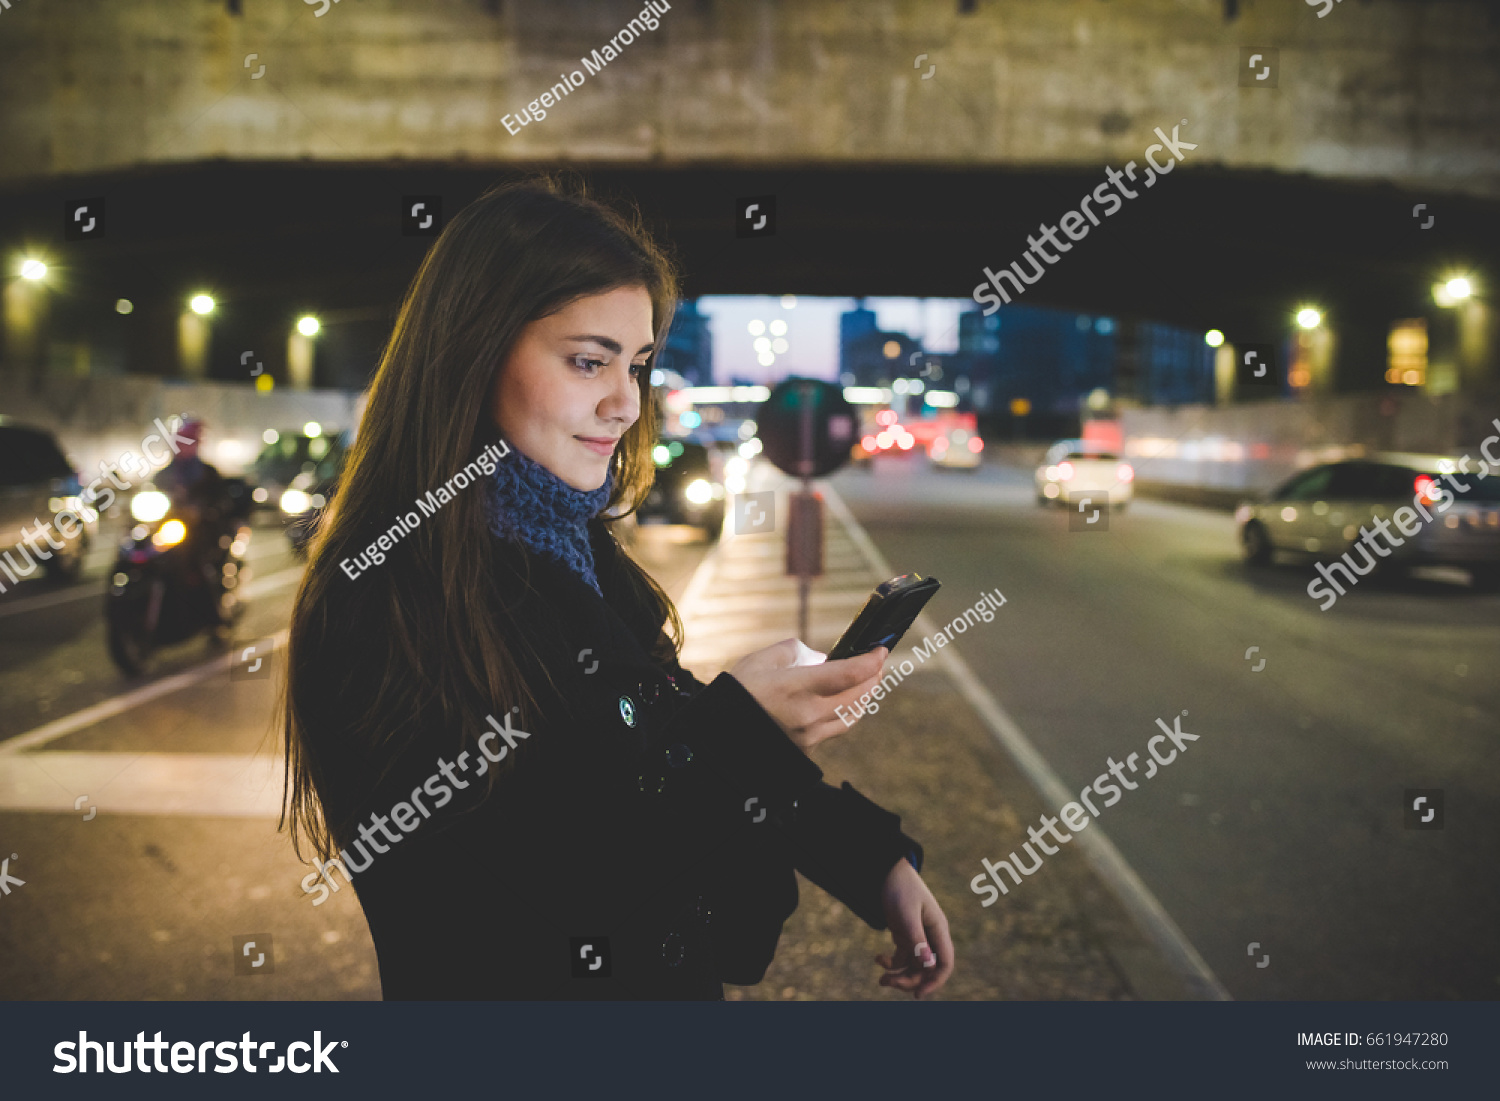 YOung woman outdoor using smart phone hand hold face illuminated by screen light - social network, communication, technology concept #661947280